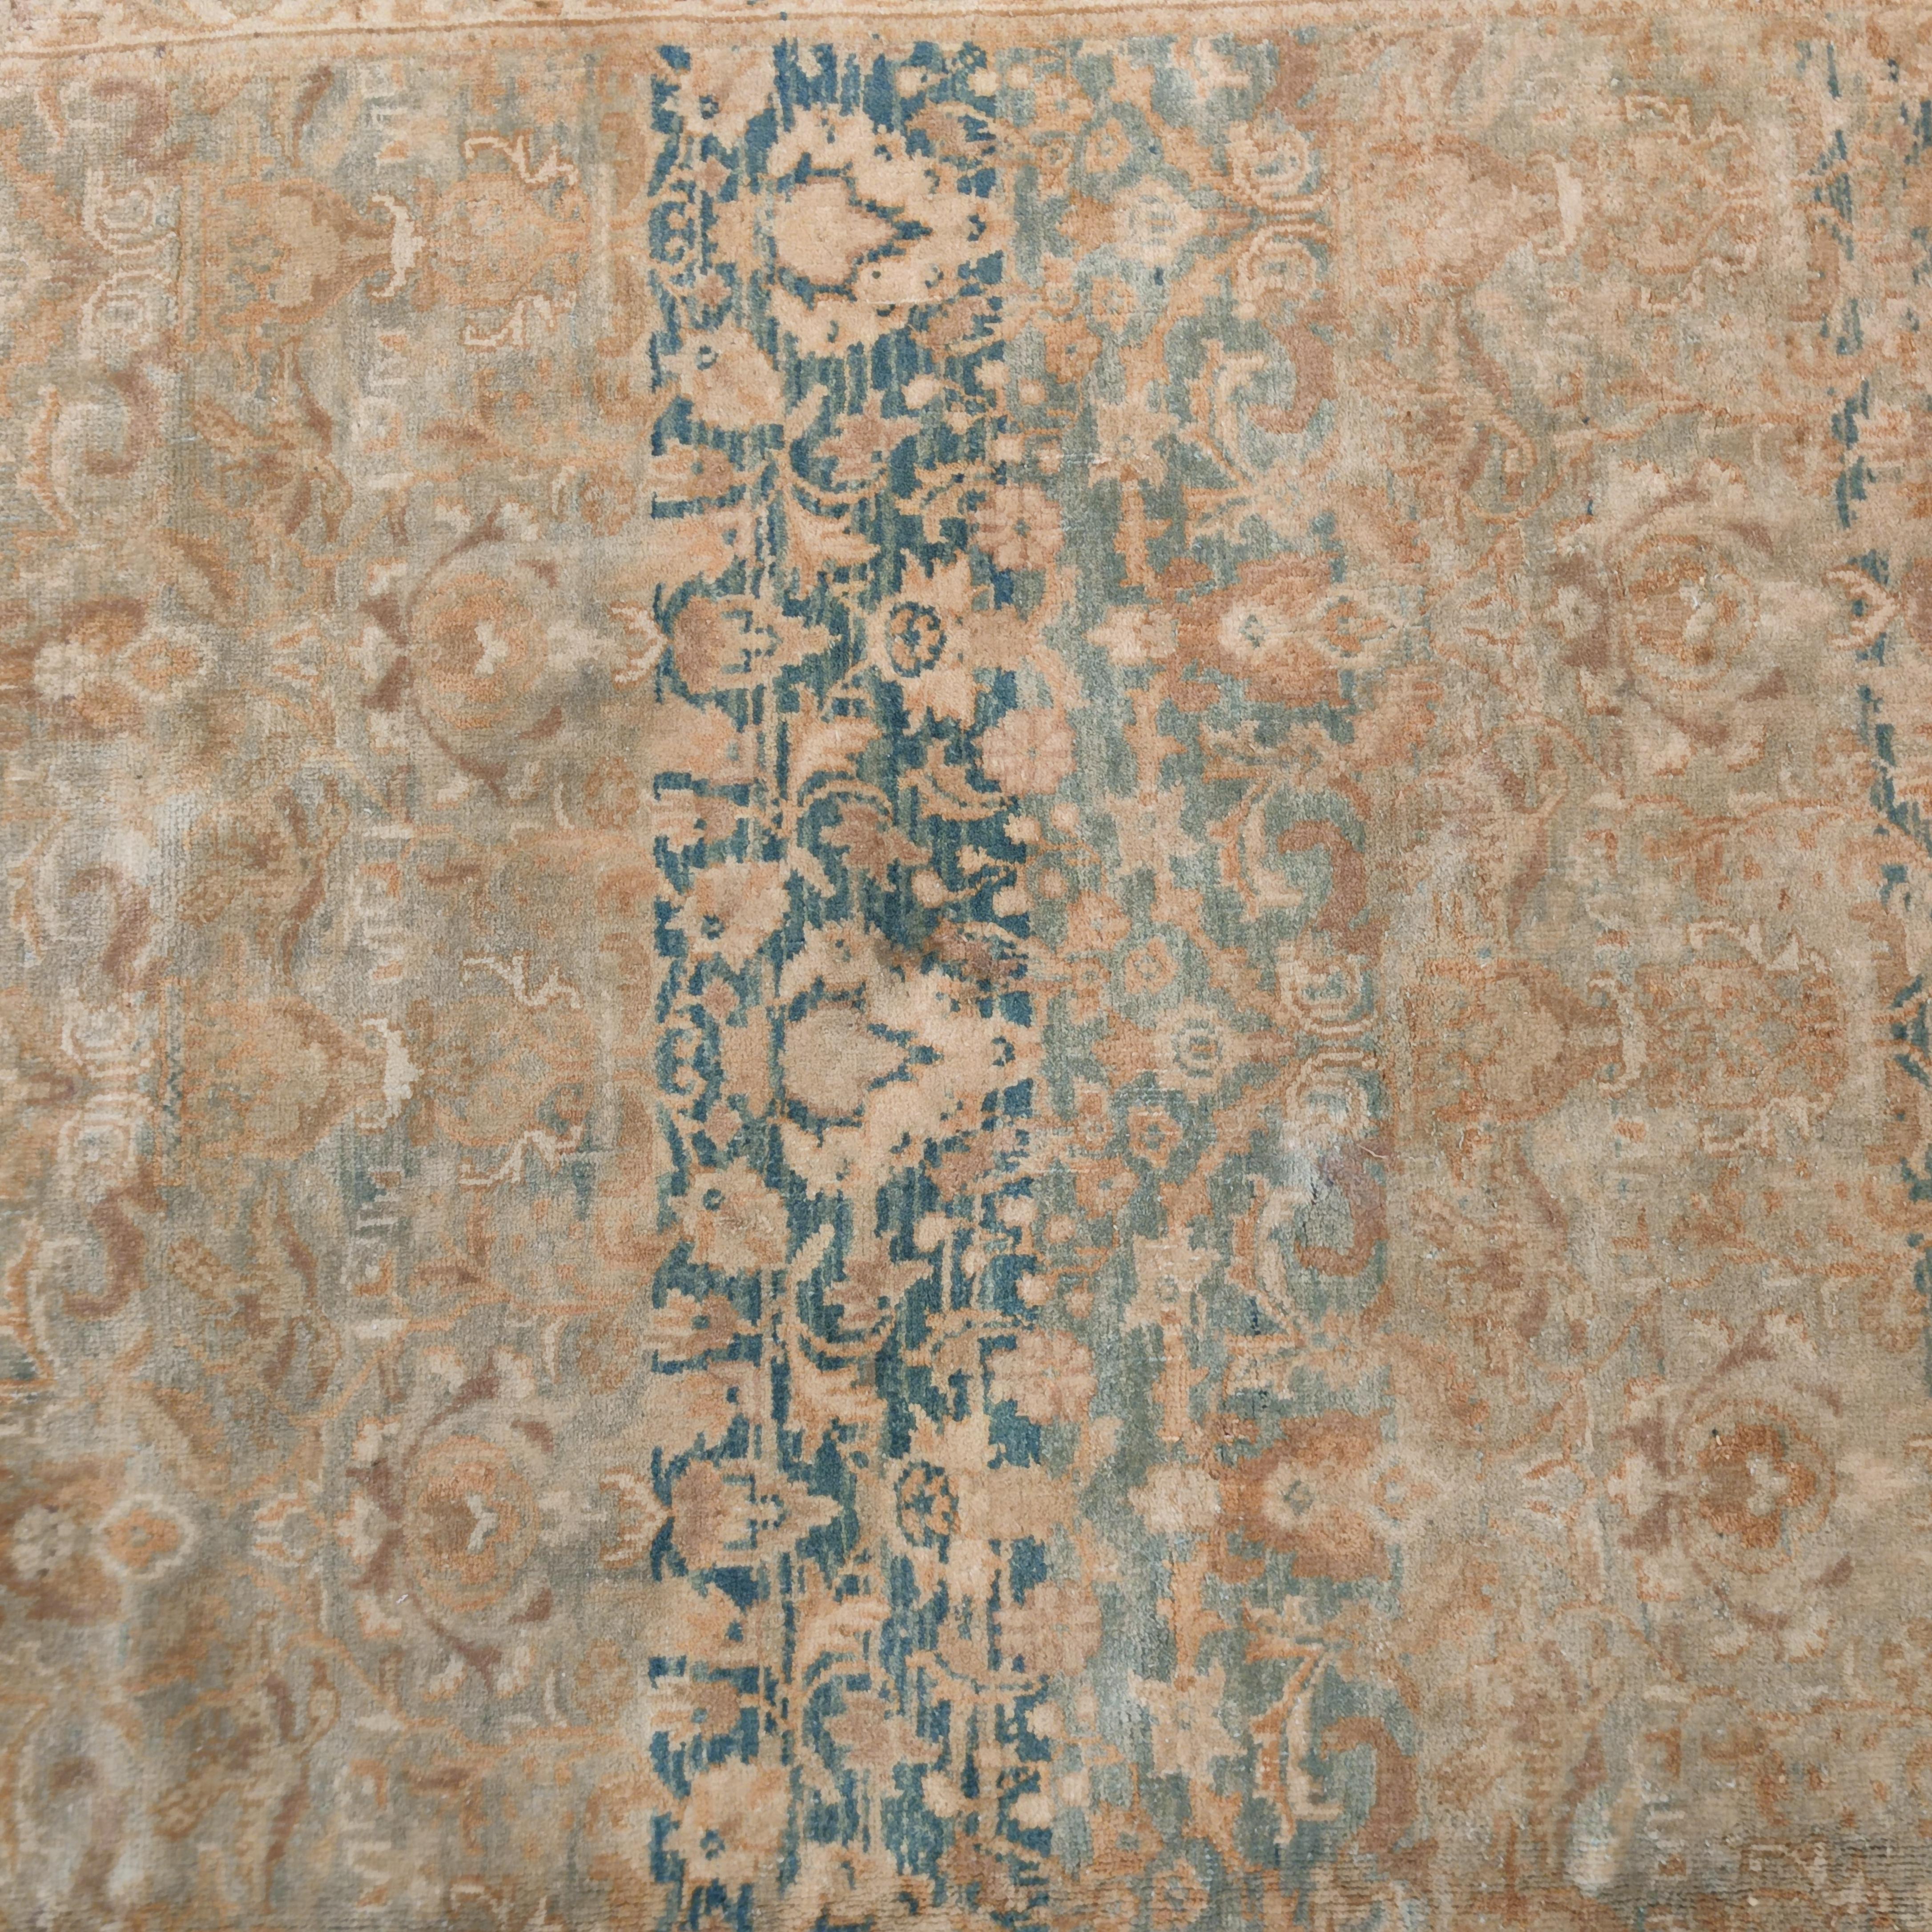 20th Century Antique Teal Blue Agra Rug with All-Over Pattern